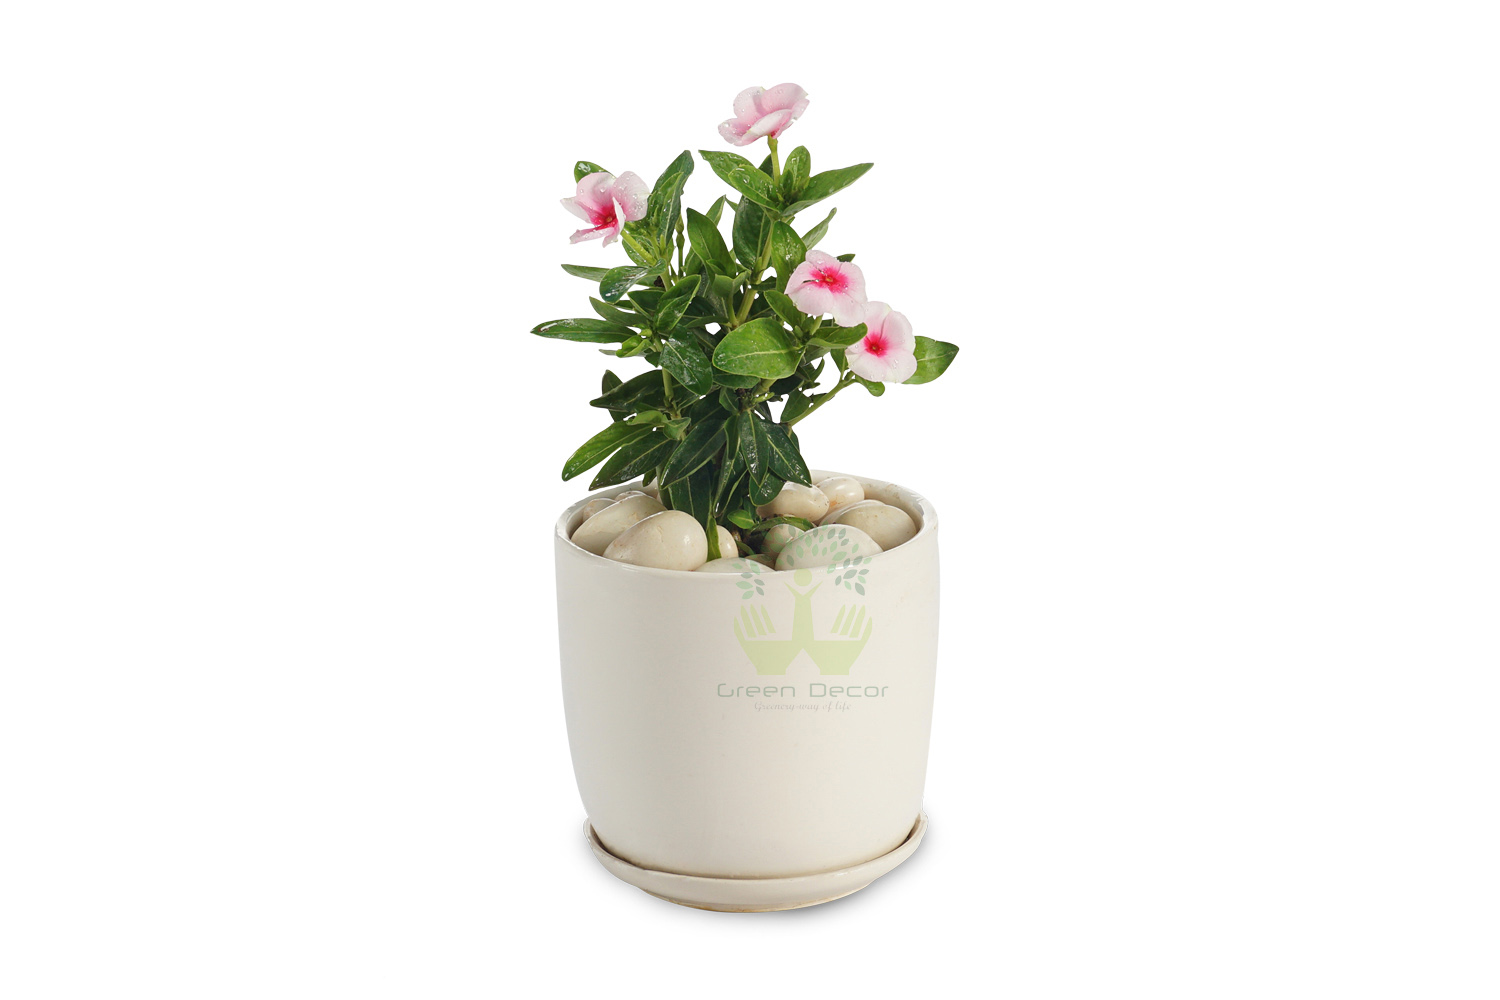 Buy Periwinkle pink Plants , White Pots and seeds in Delhi NCR by the best online nursery shop Greendecor.